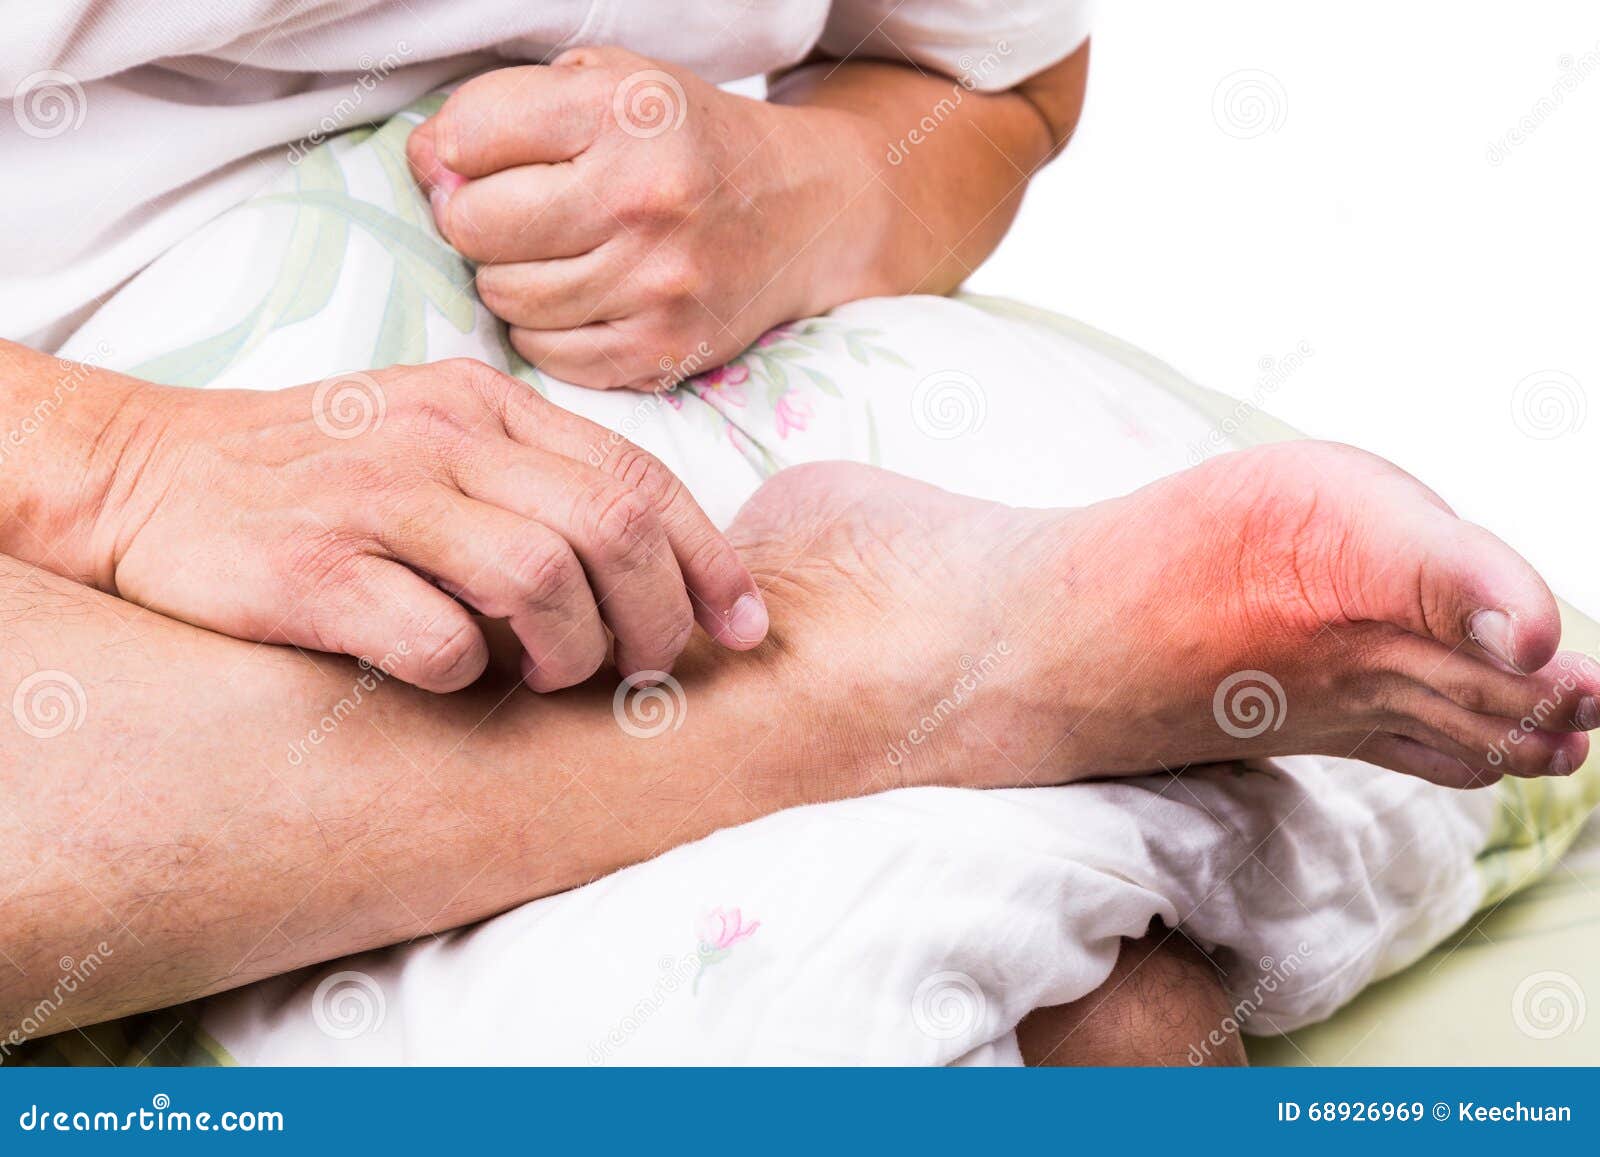 man on bed embrace foot with painful swollen gout inflammation